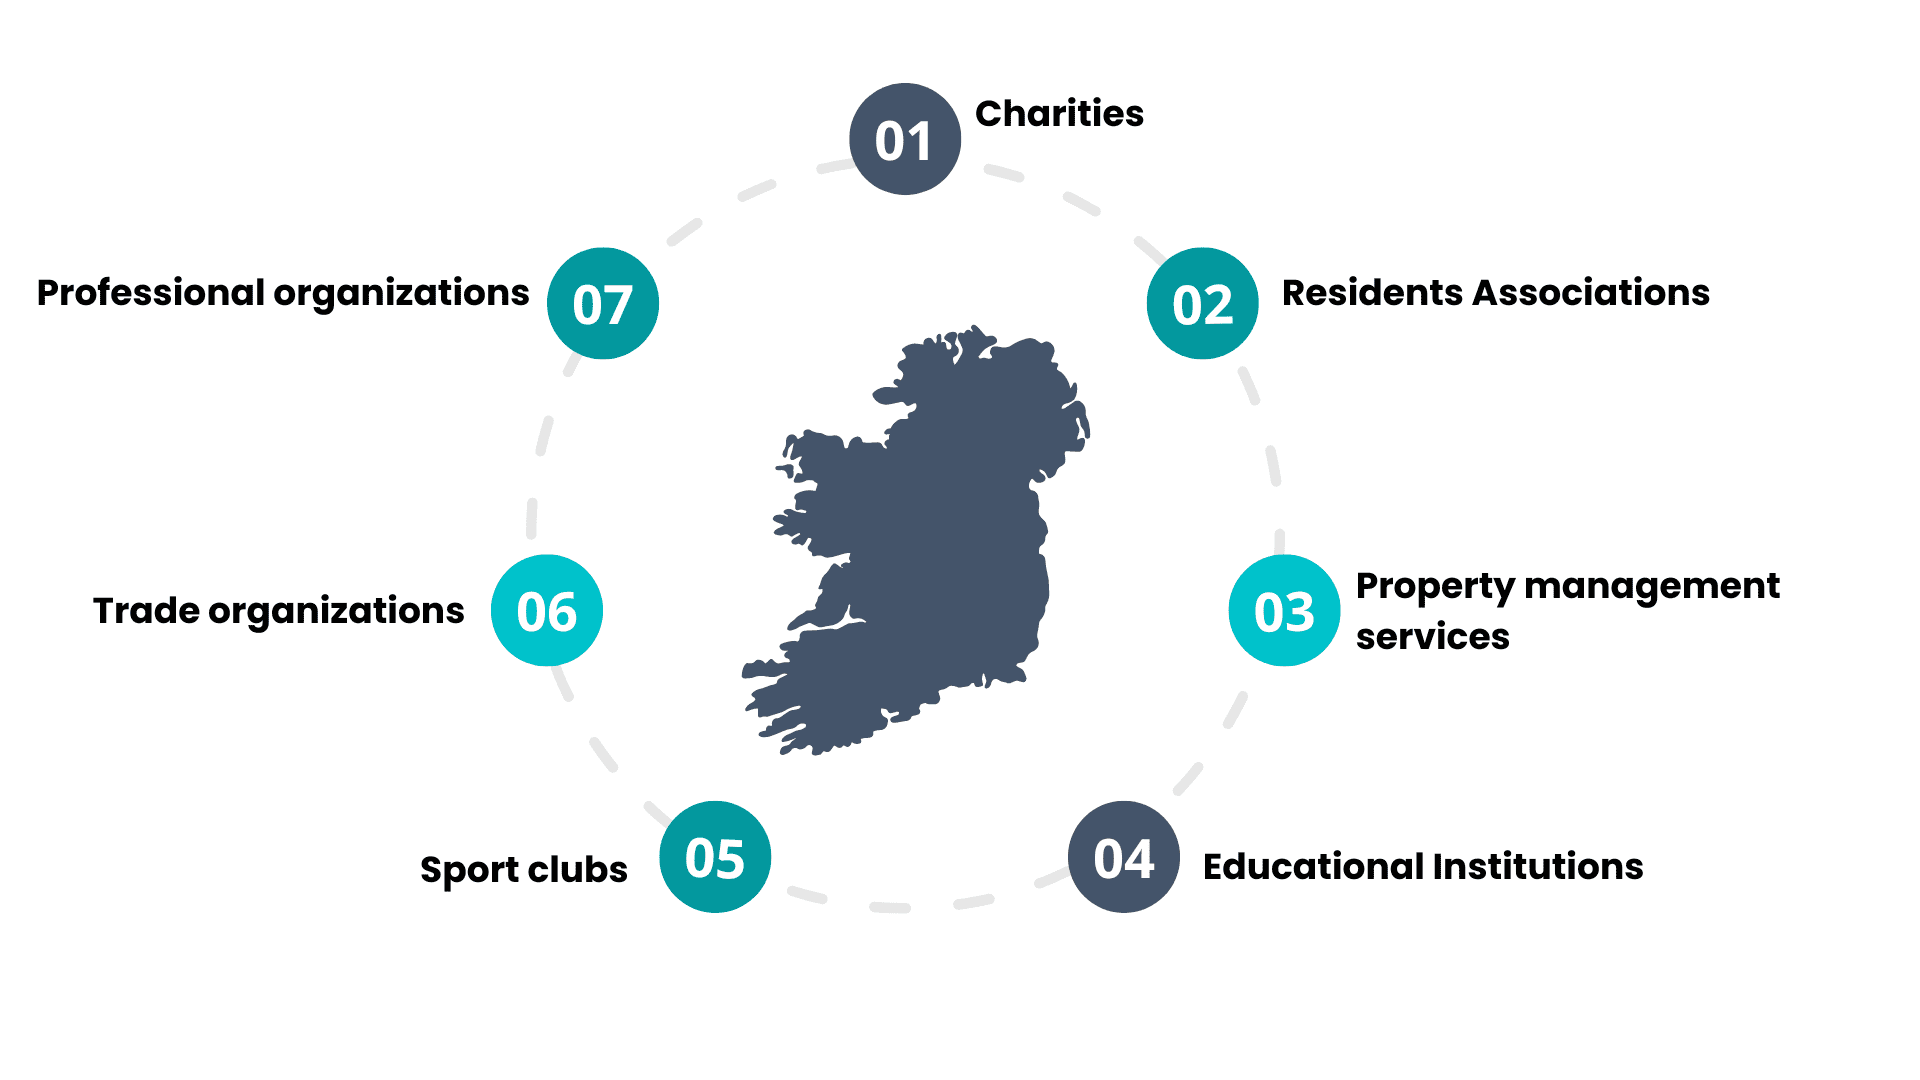 activities carried out under company limited by guarantee in ireland